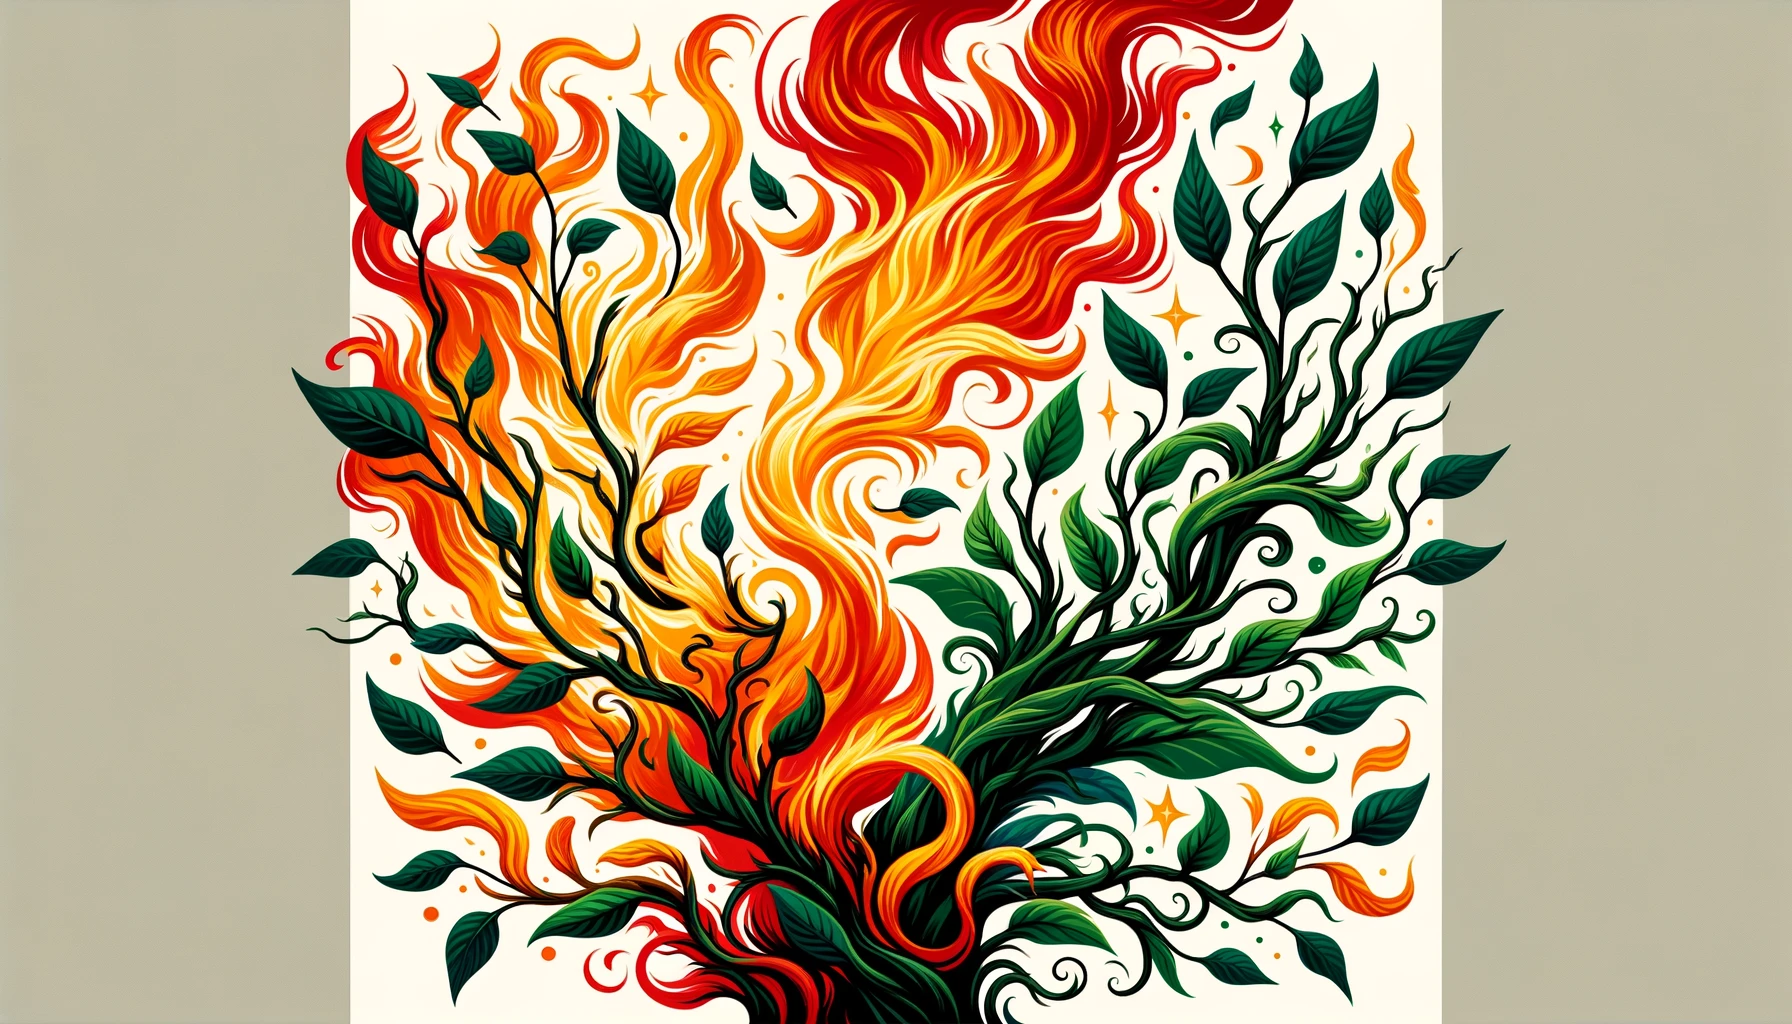 Create a 169 image that emphasizes the fiery energy and passion of the Wands suit in the Minor Arcana with a stronger focus on the branches The image should depict vibrant flames but w